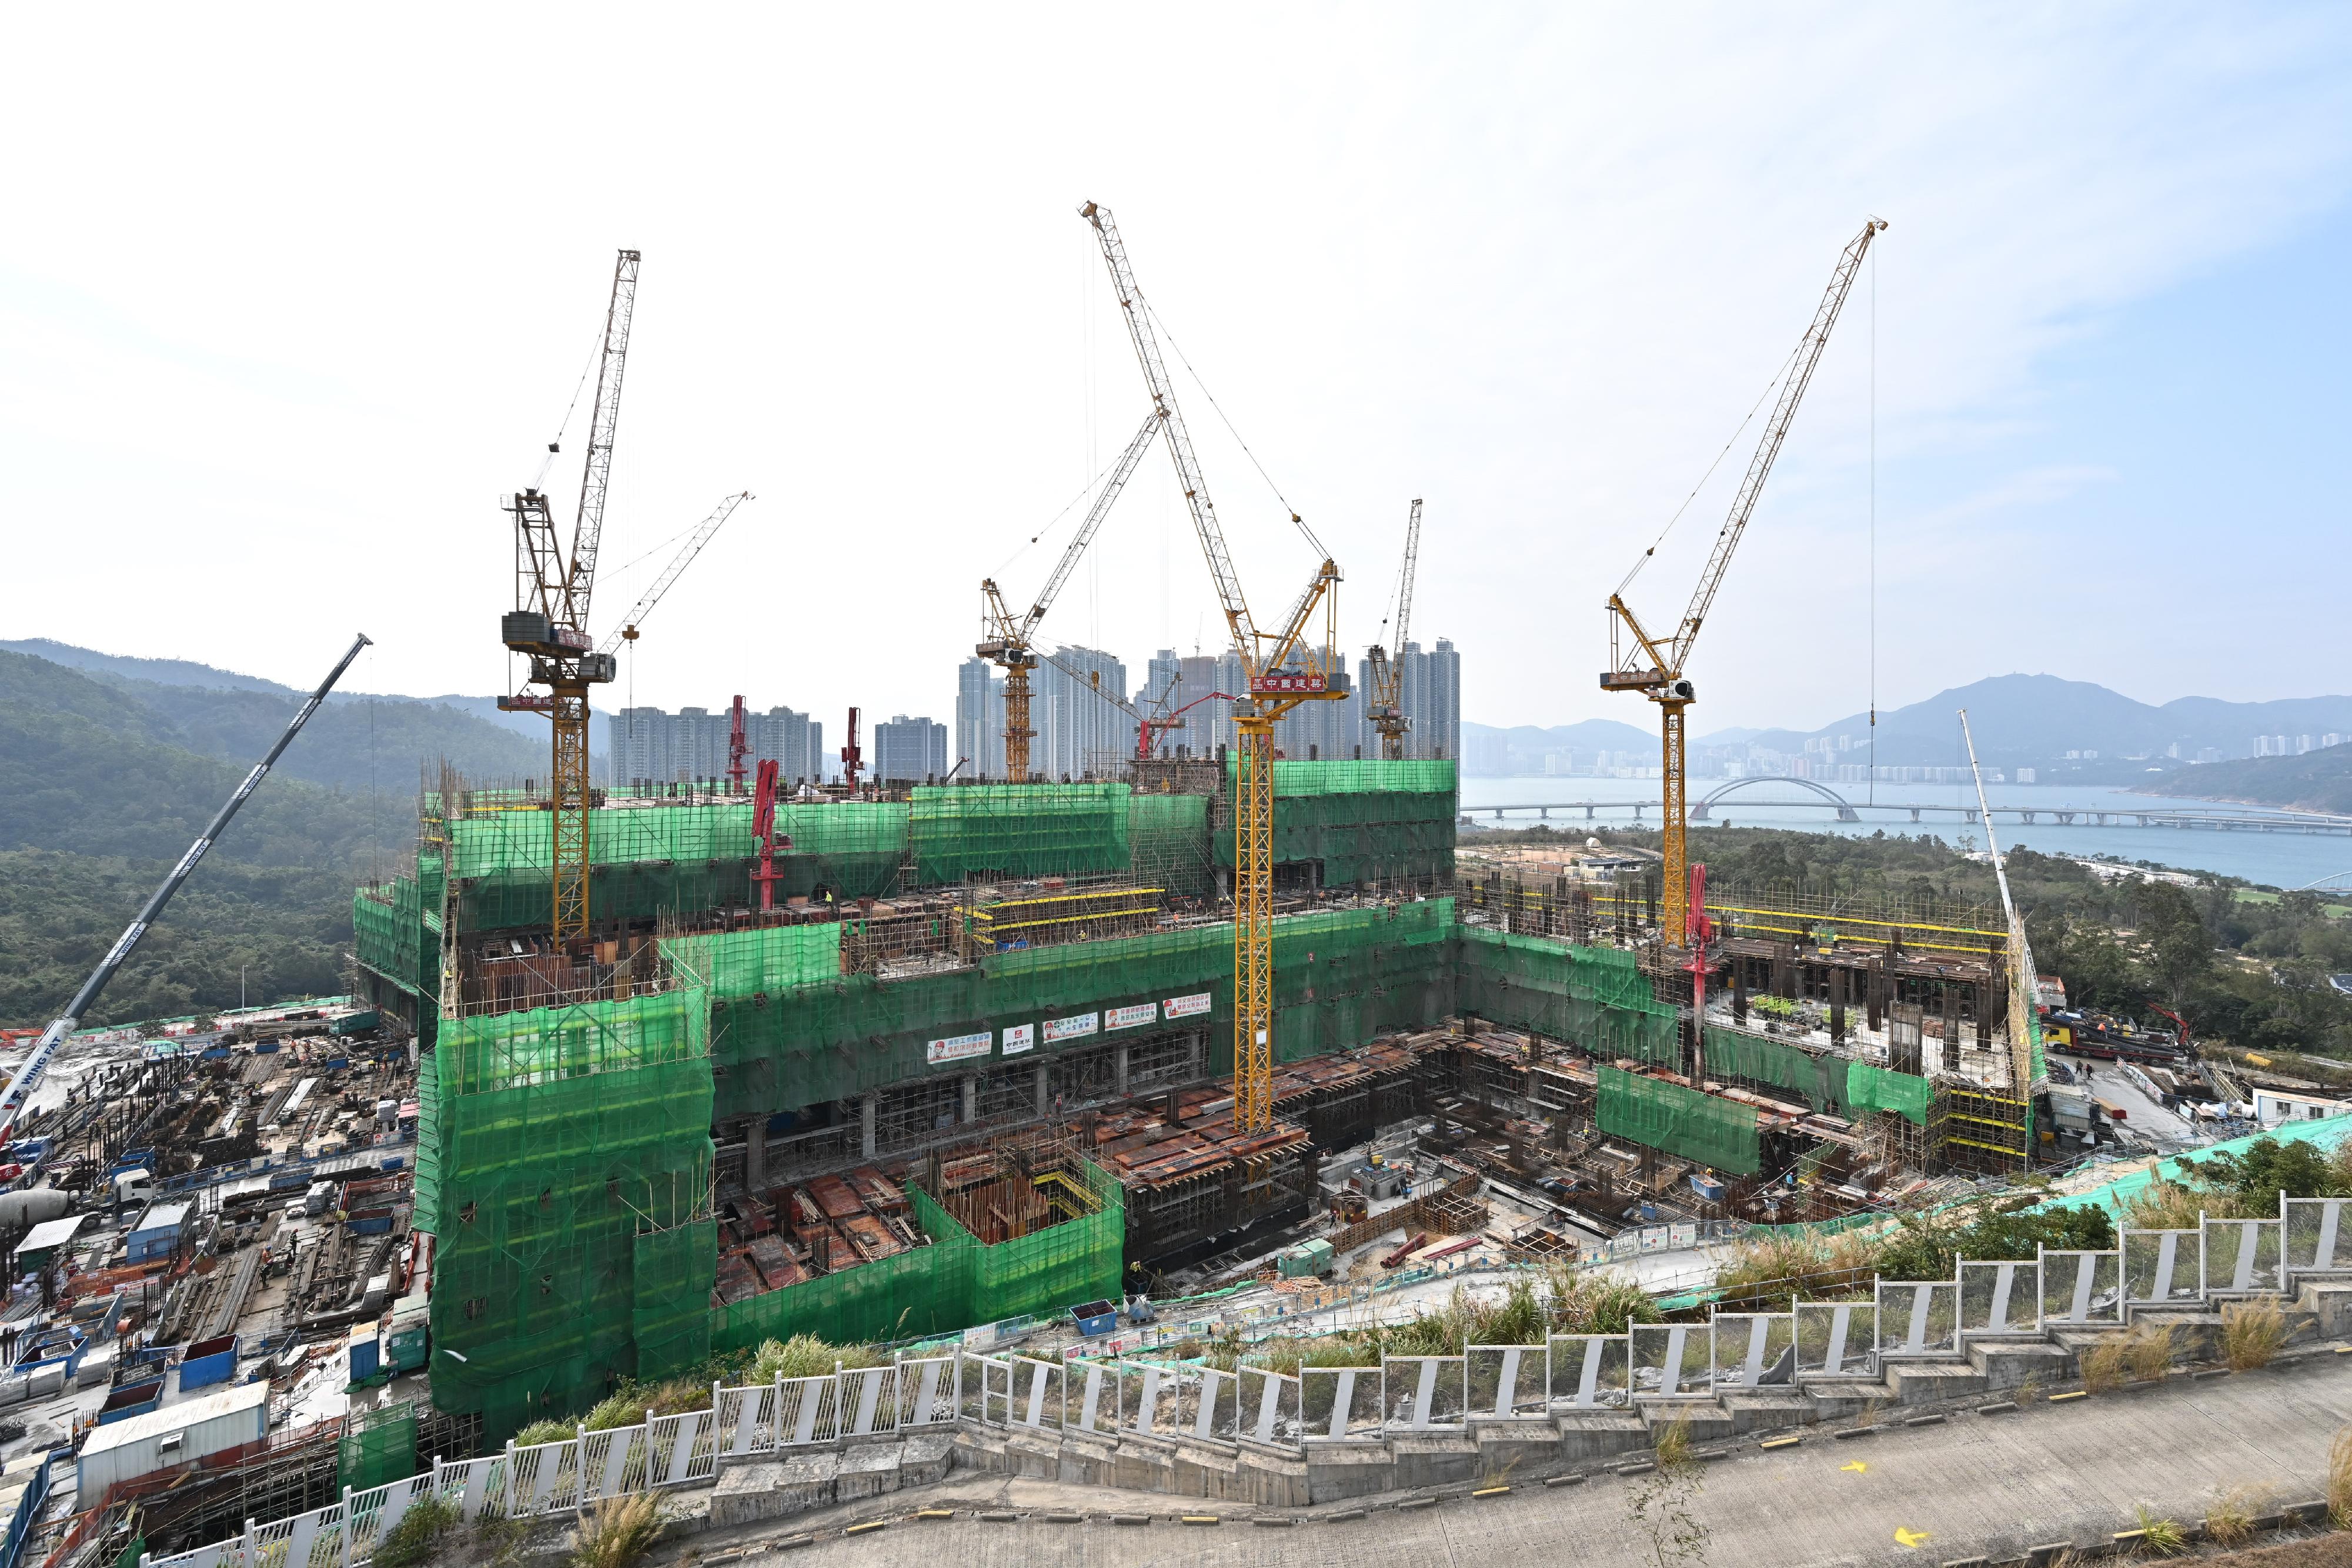 The signing ceremony of the Strategic Collaboration Agreement between Guangdong Provincial Hospital of Traditional Chinese Medicine and Chinese Medicine Hospital of Hong Kong was held today (January 24) to lay the foundation and direction for co-operation between the two hospitals. Photo shows the Chinese Medicine Hospital of Hong Kong under construction.